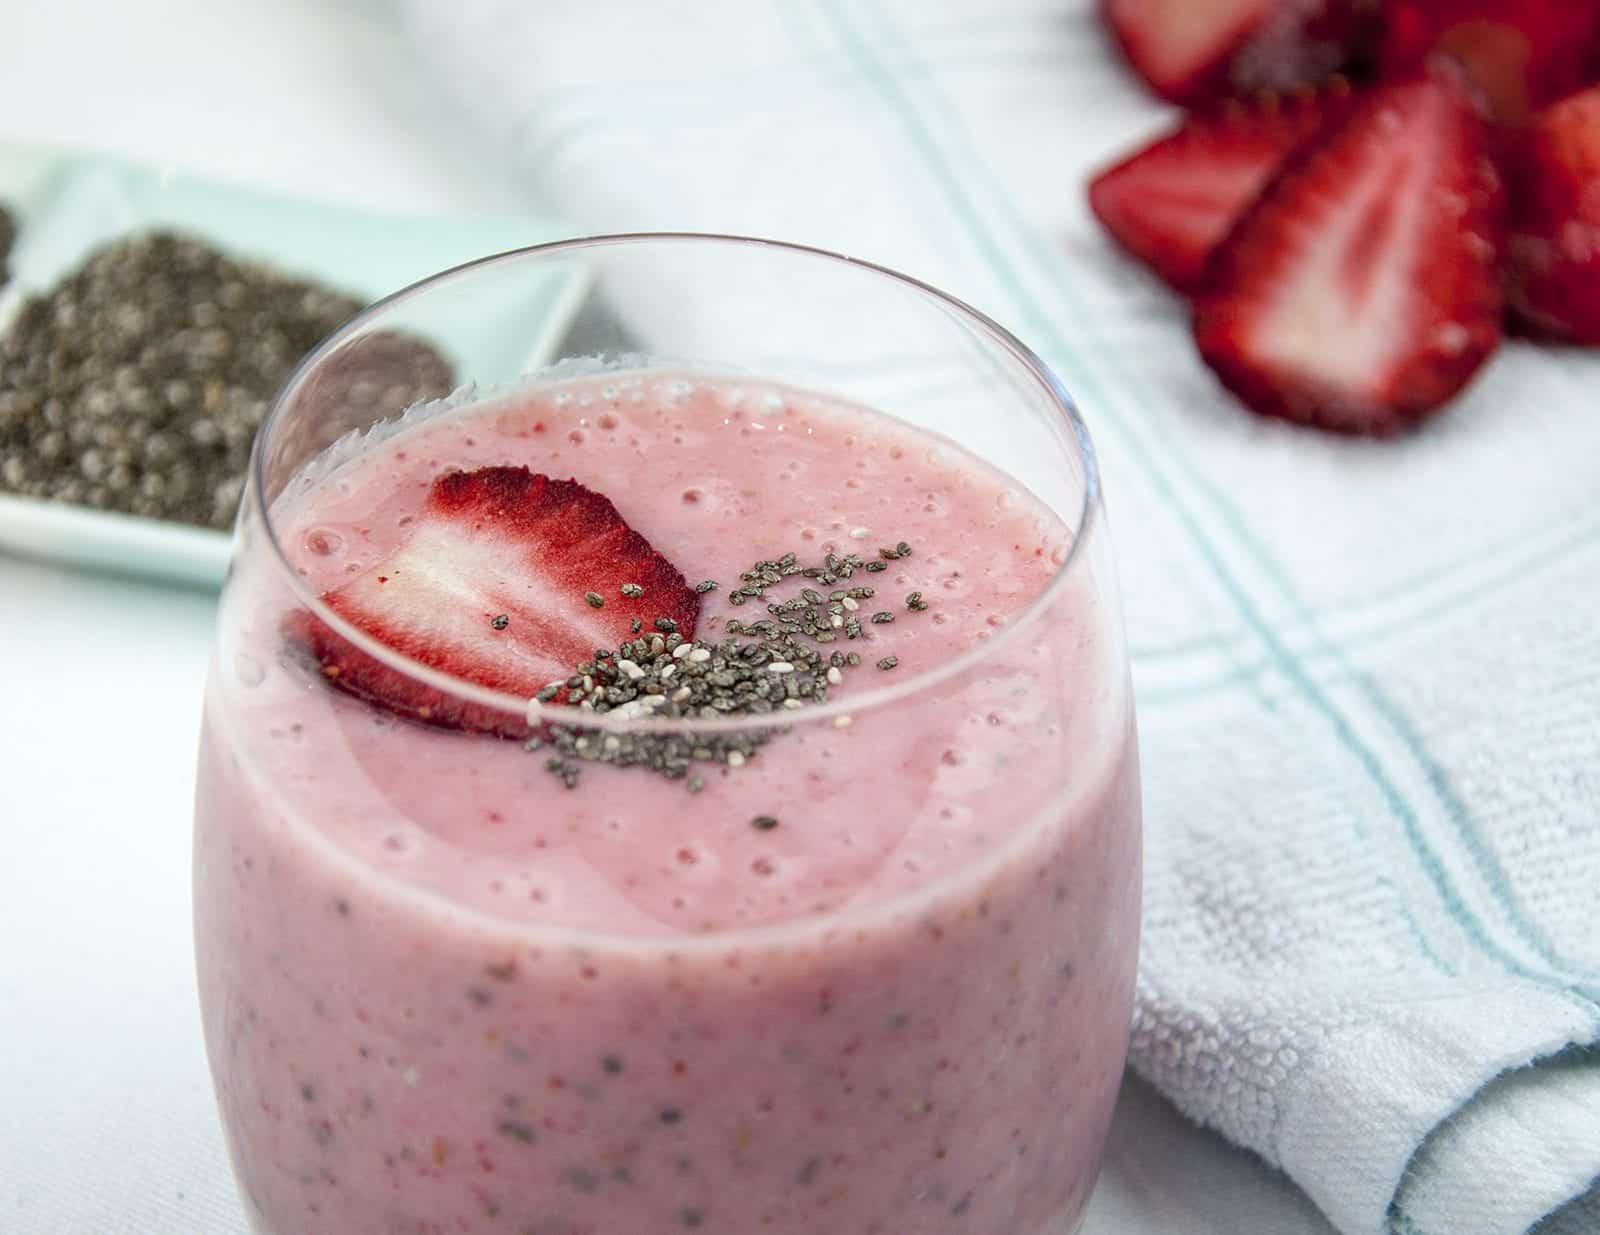 Strawberry Chia Seeds - What a smoothie. Vegan friendly too!!